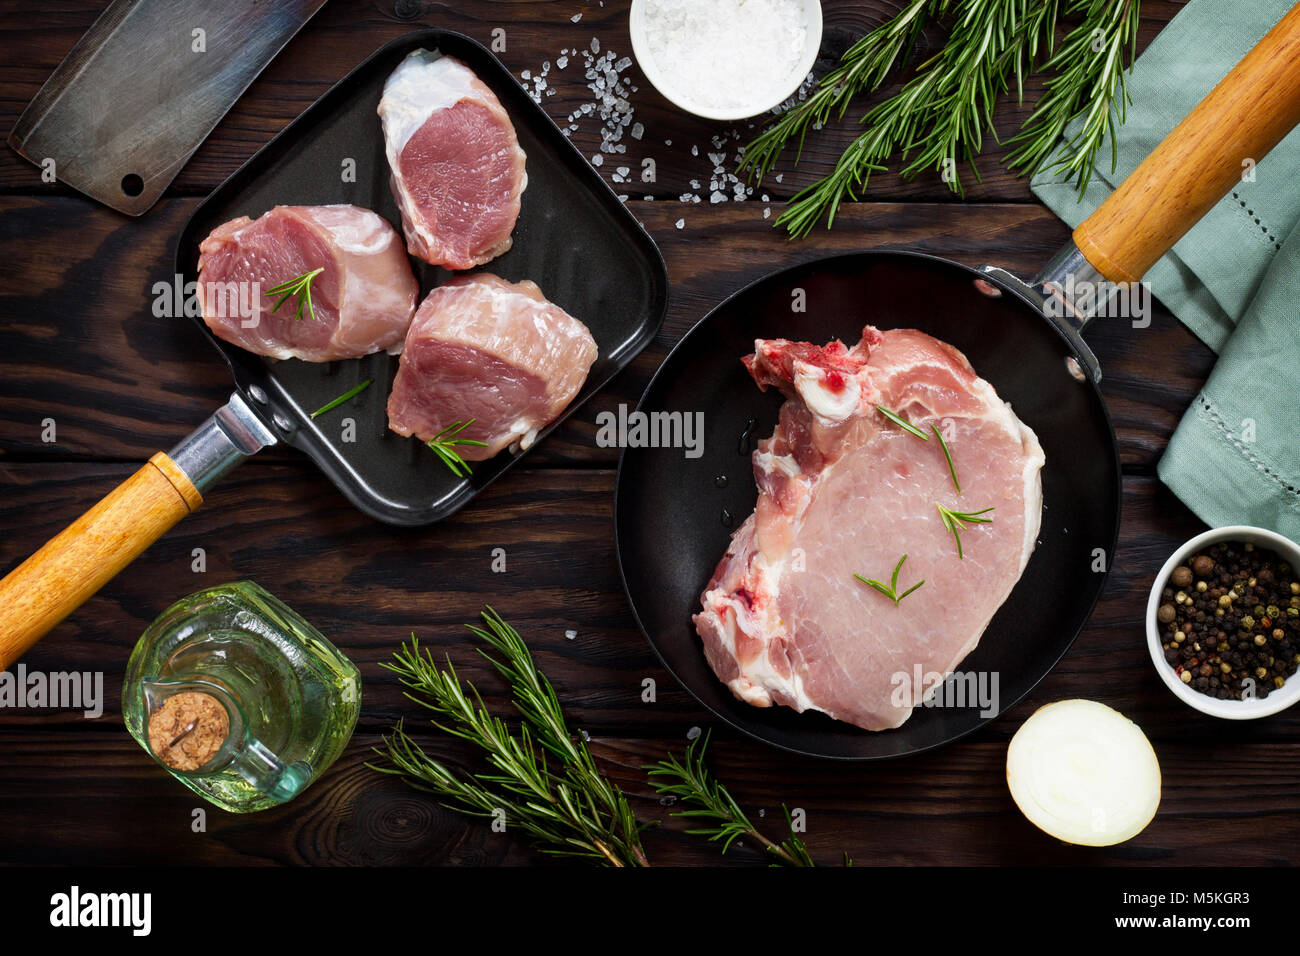 Fresh various meat. Raw pork steak and cutlets on a cast iron frying pan, spices and fresh rosemary on a kitchen wooden table. Flat lay. Top view. Stock Photo